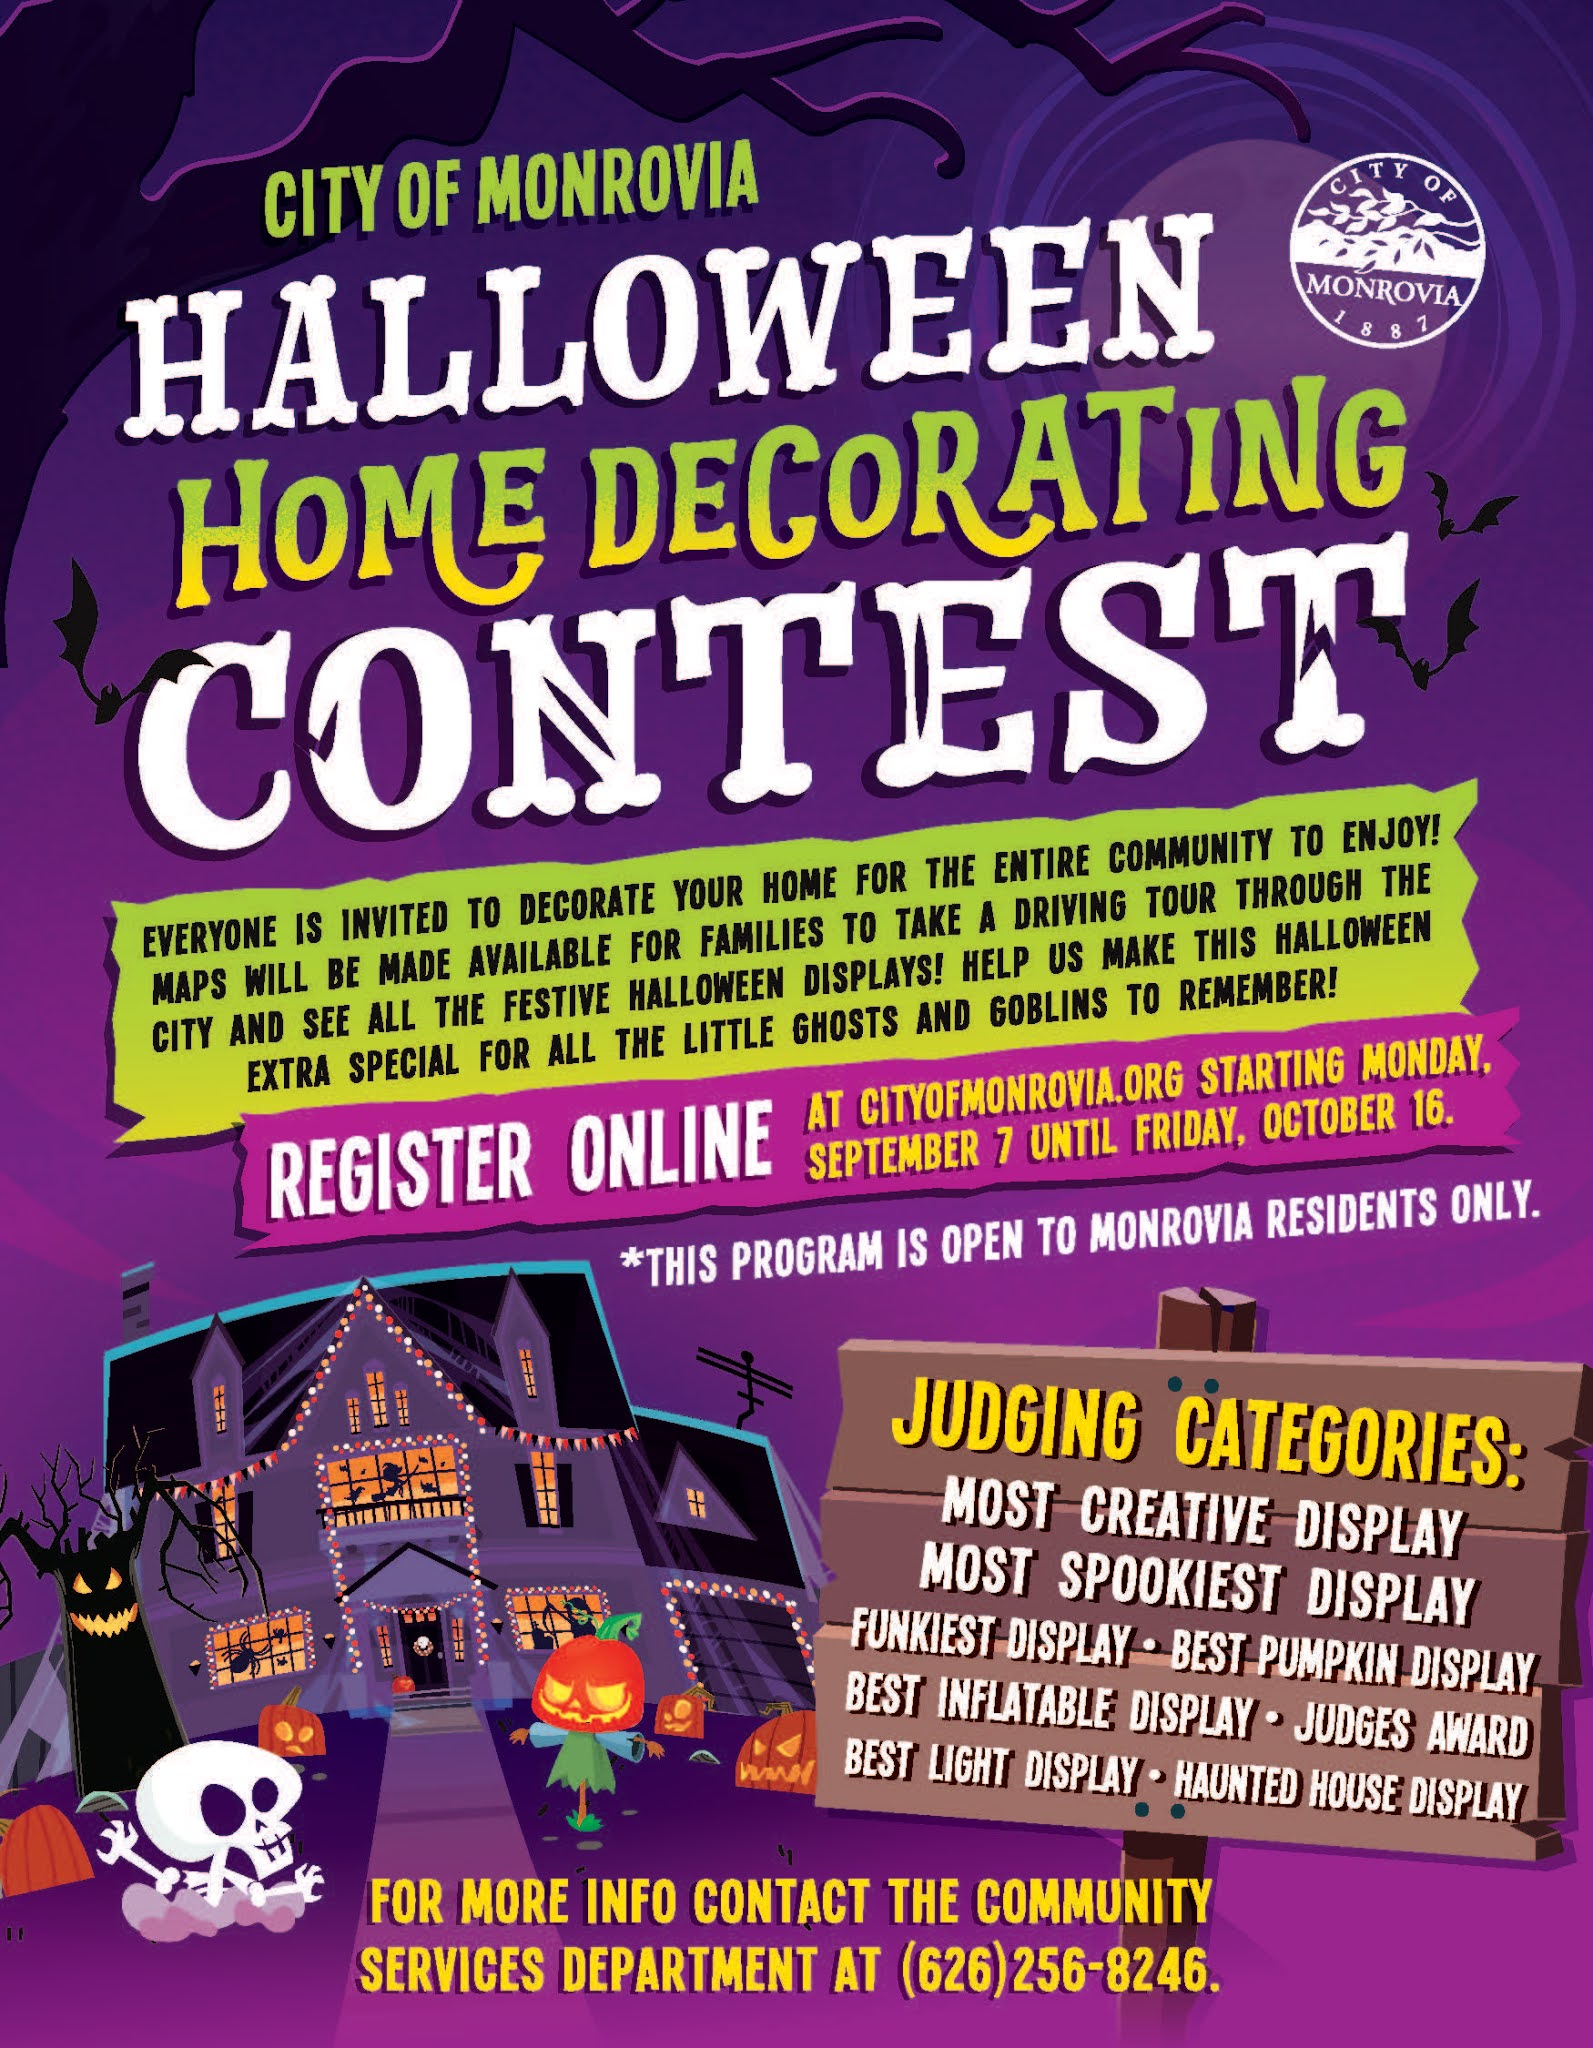 Monrovia Now News and Comment about Monrovia, California Halloween